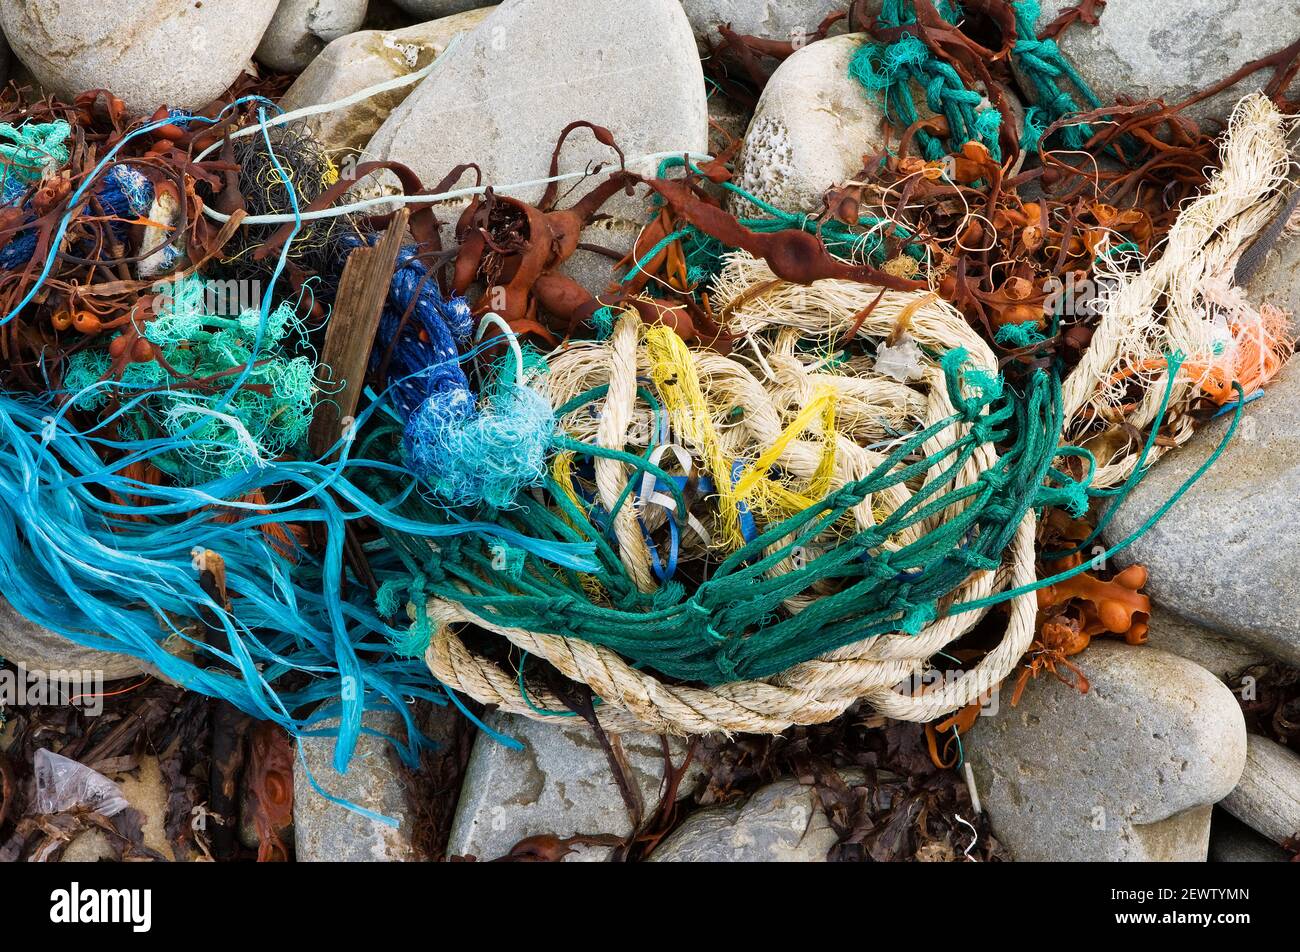 The remnants of fishing nets and ropes washed up on a pebble shoreline in West Cork, Ireland. Marine debris and litter is becoming a major problem. Stock Photo